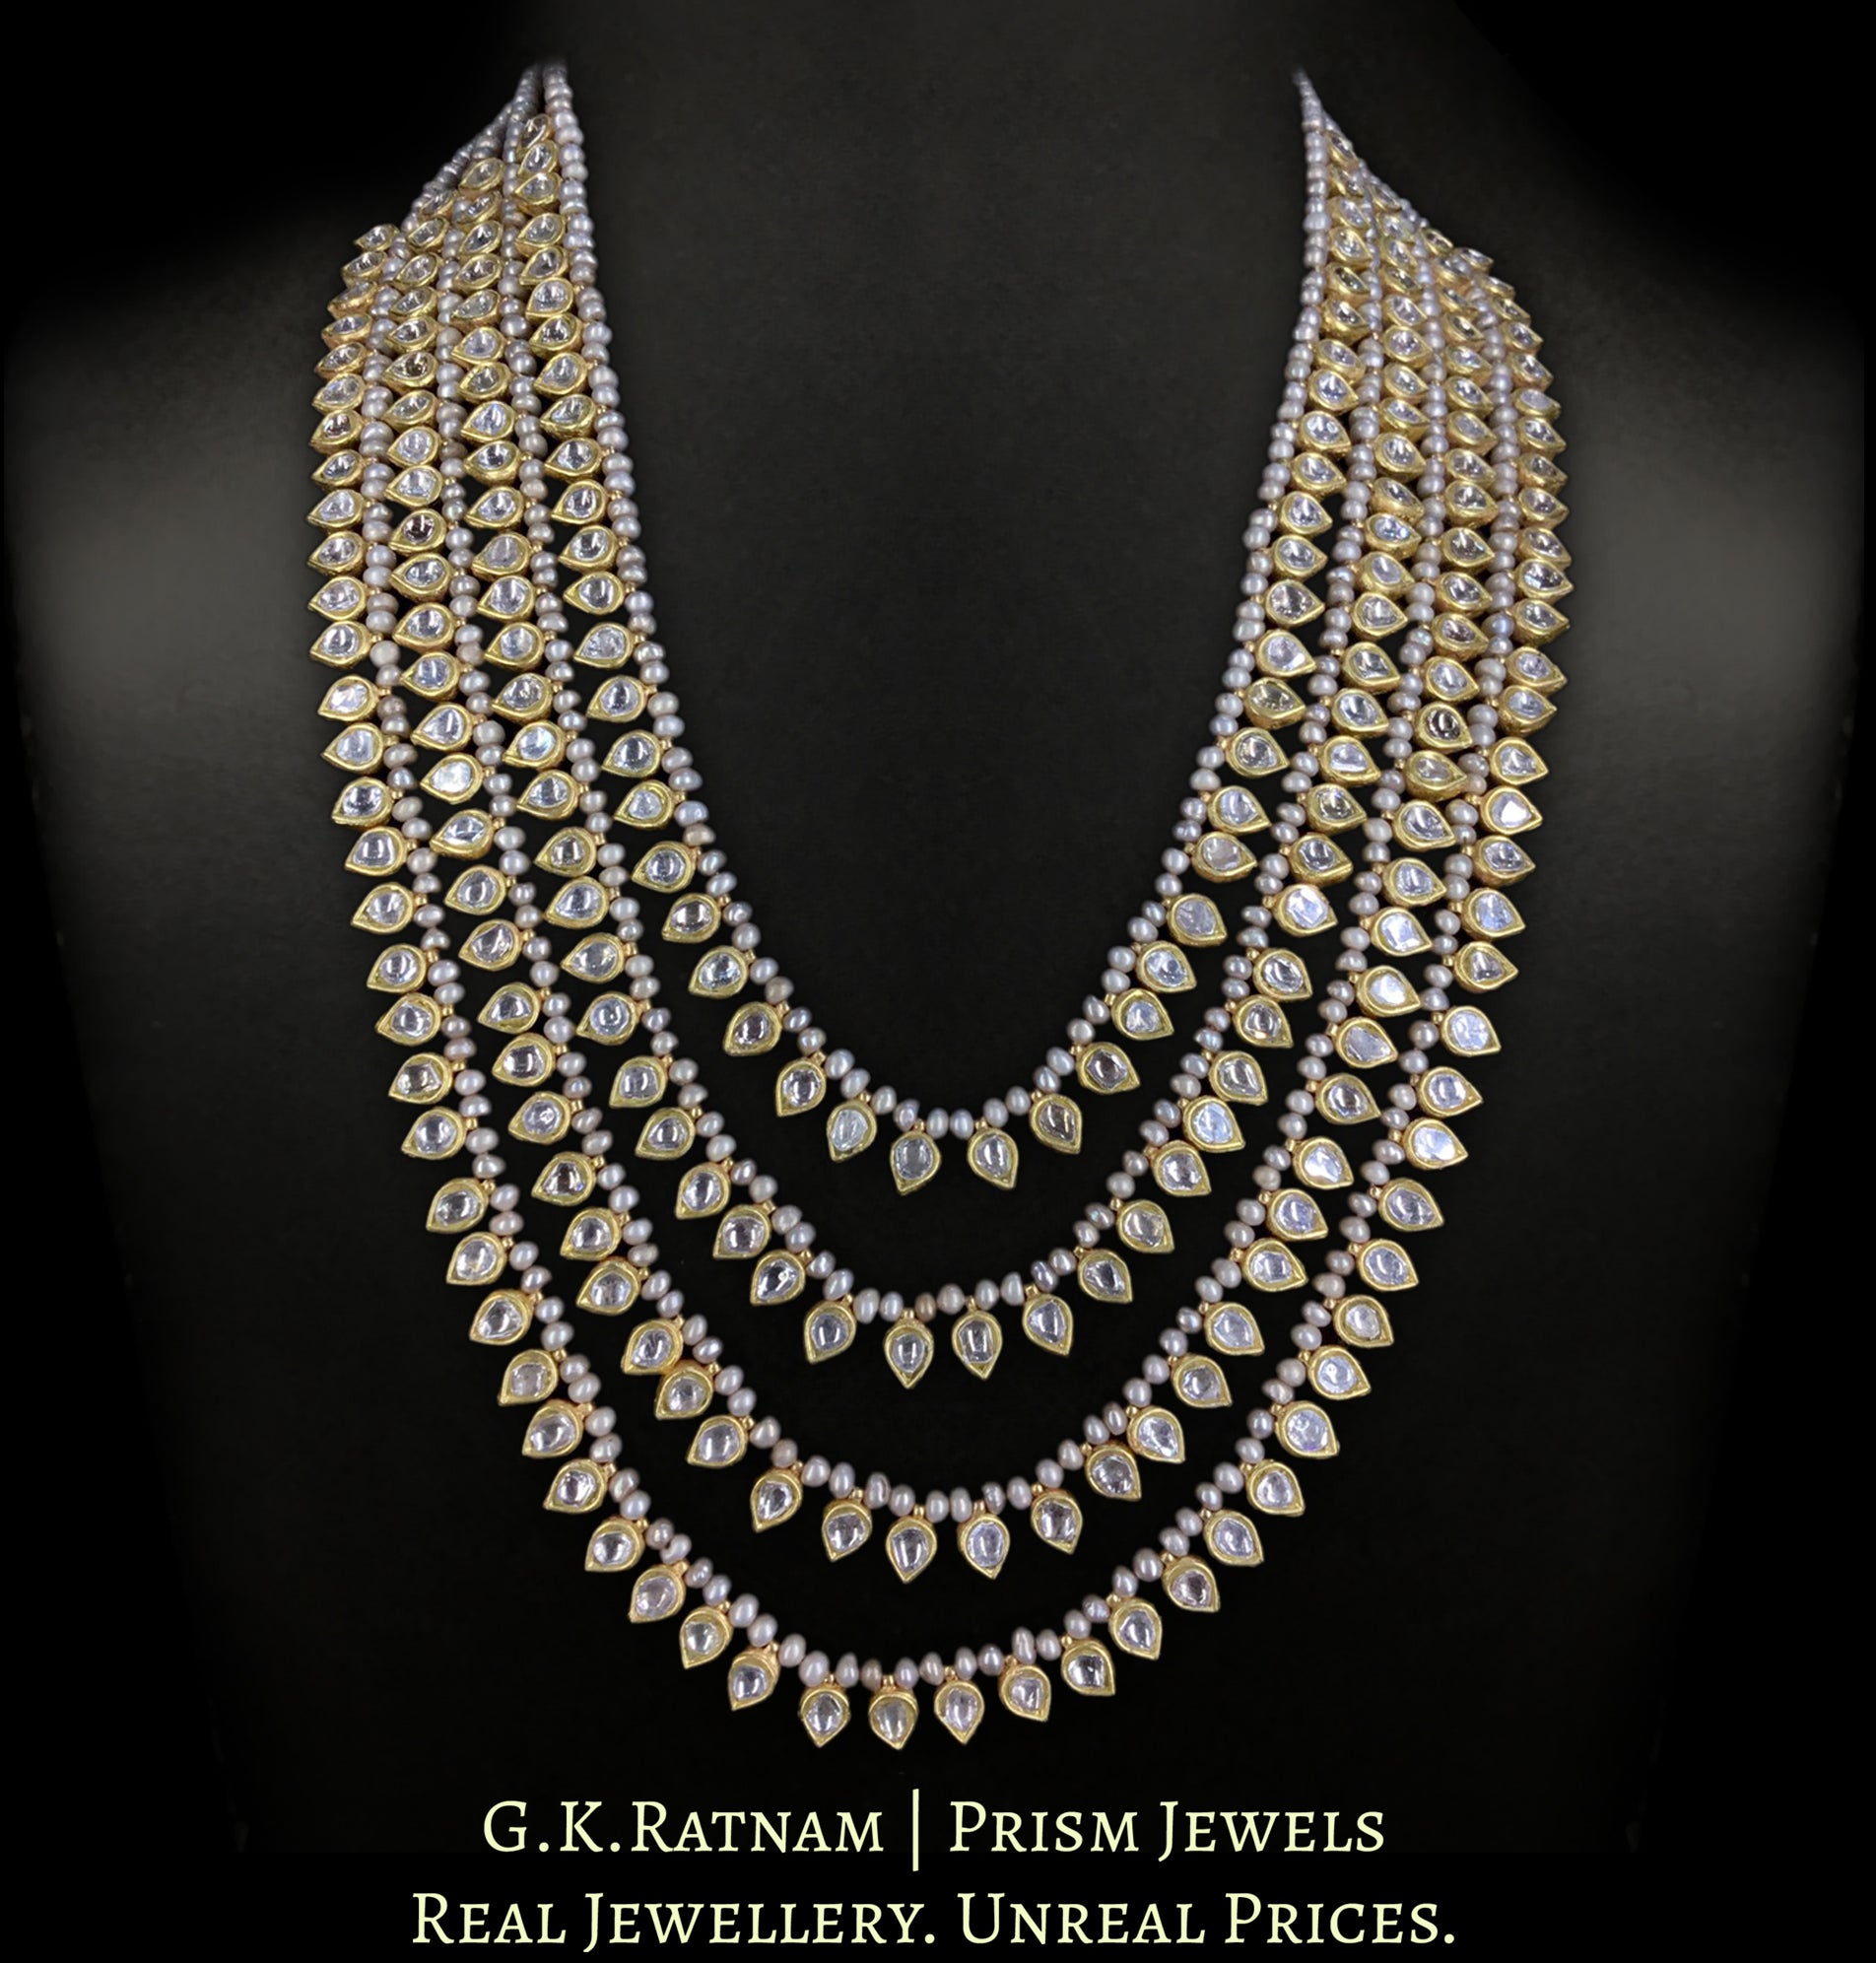 23k Gold and Diamond Polki Chaar-Lad (four-row) Necklace with Antiqued Freshwater Pearls